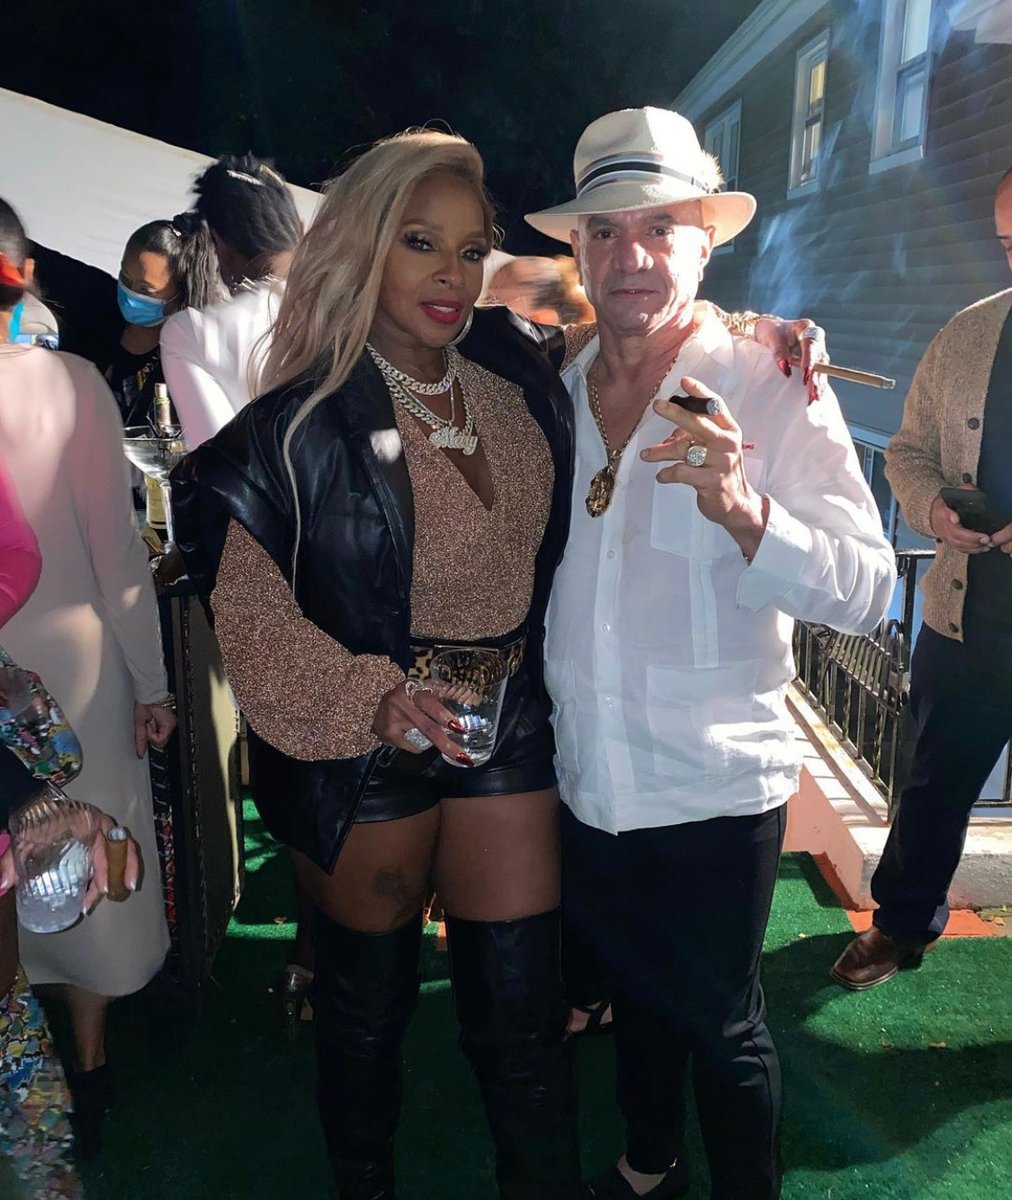 Event: Birthday Celebration for Xenos DaCosta Sr.
Rosario Cigars LLC - @rosariocigarsllc @therealmaryjblige
Handcrafted Cigars is a must for a birthday party
.
#rosariocigars #maryjblige #mjb #happybirthday #HB #birthday #decor #event #privatedinner #privateparties